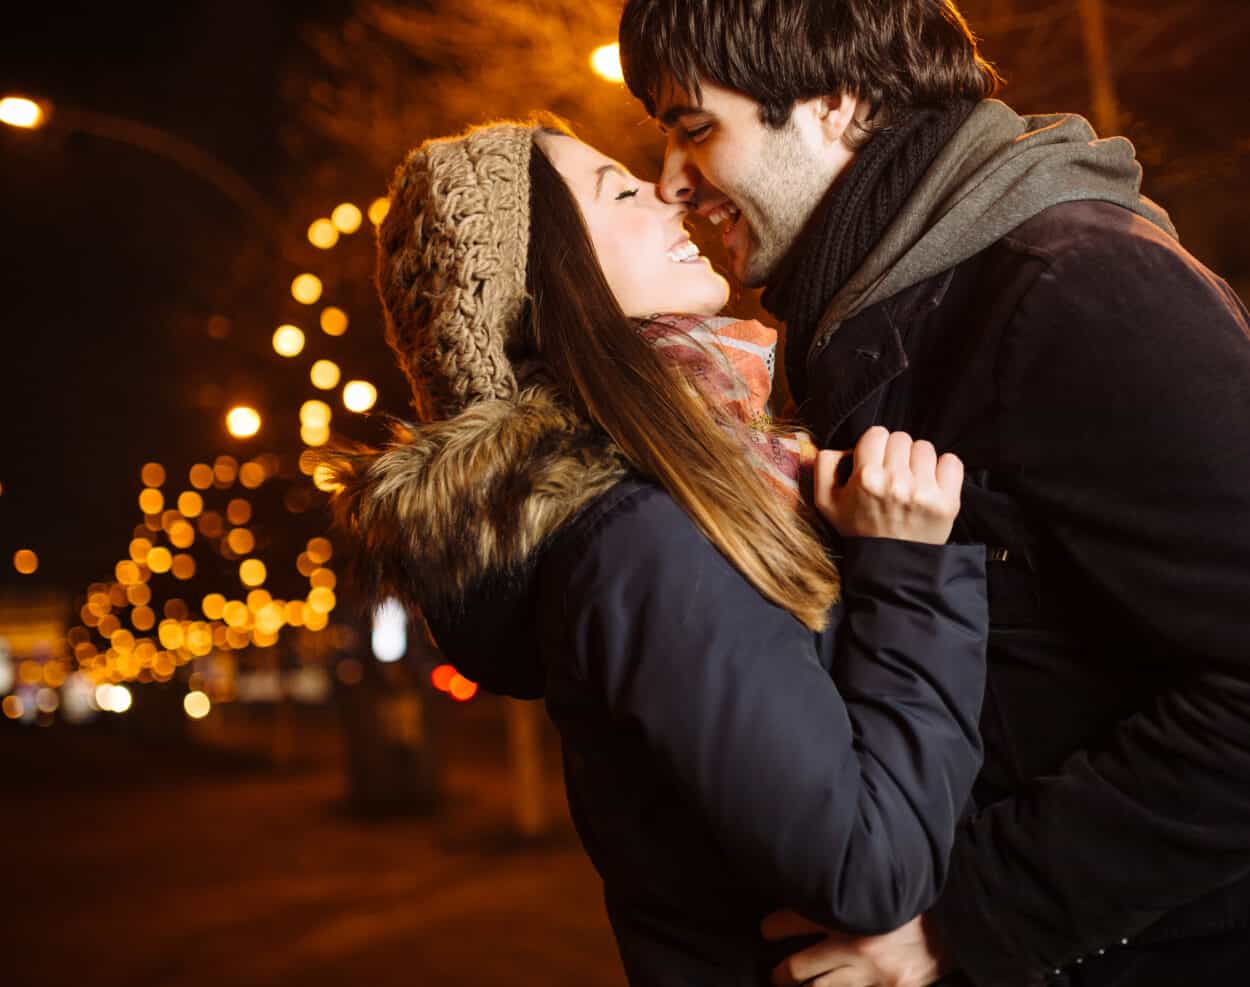 more great outdoor date ideas